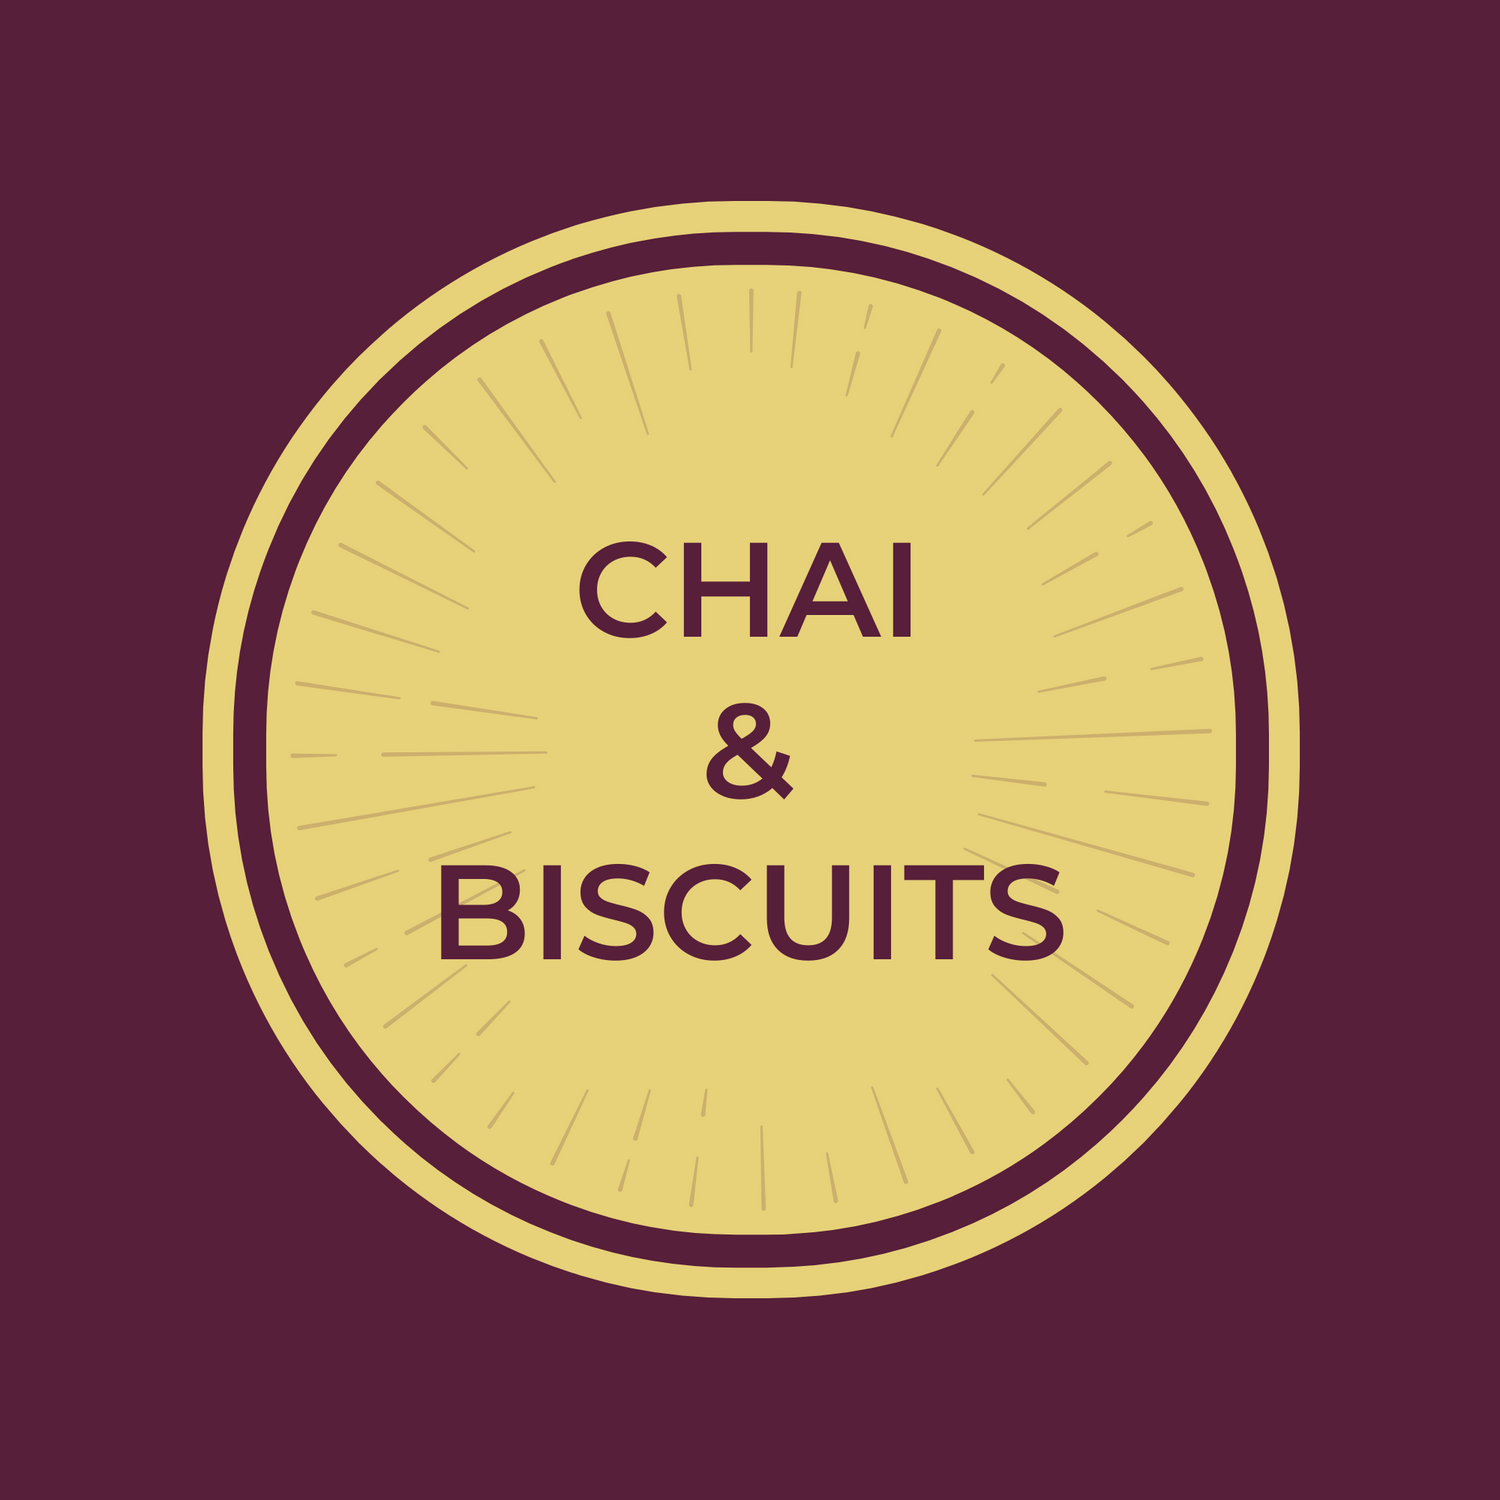 Chai & Biscuits